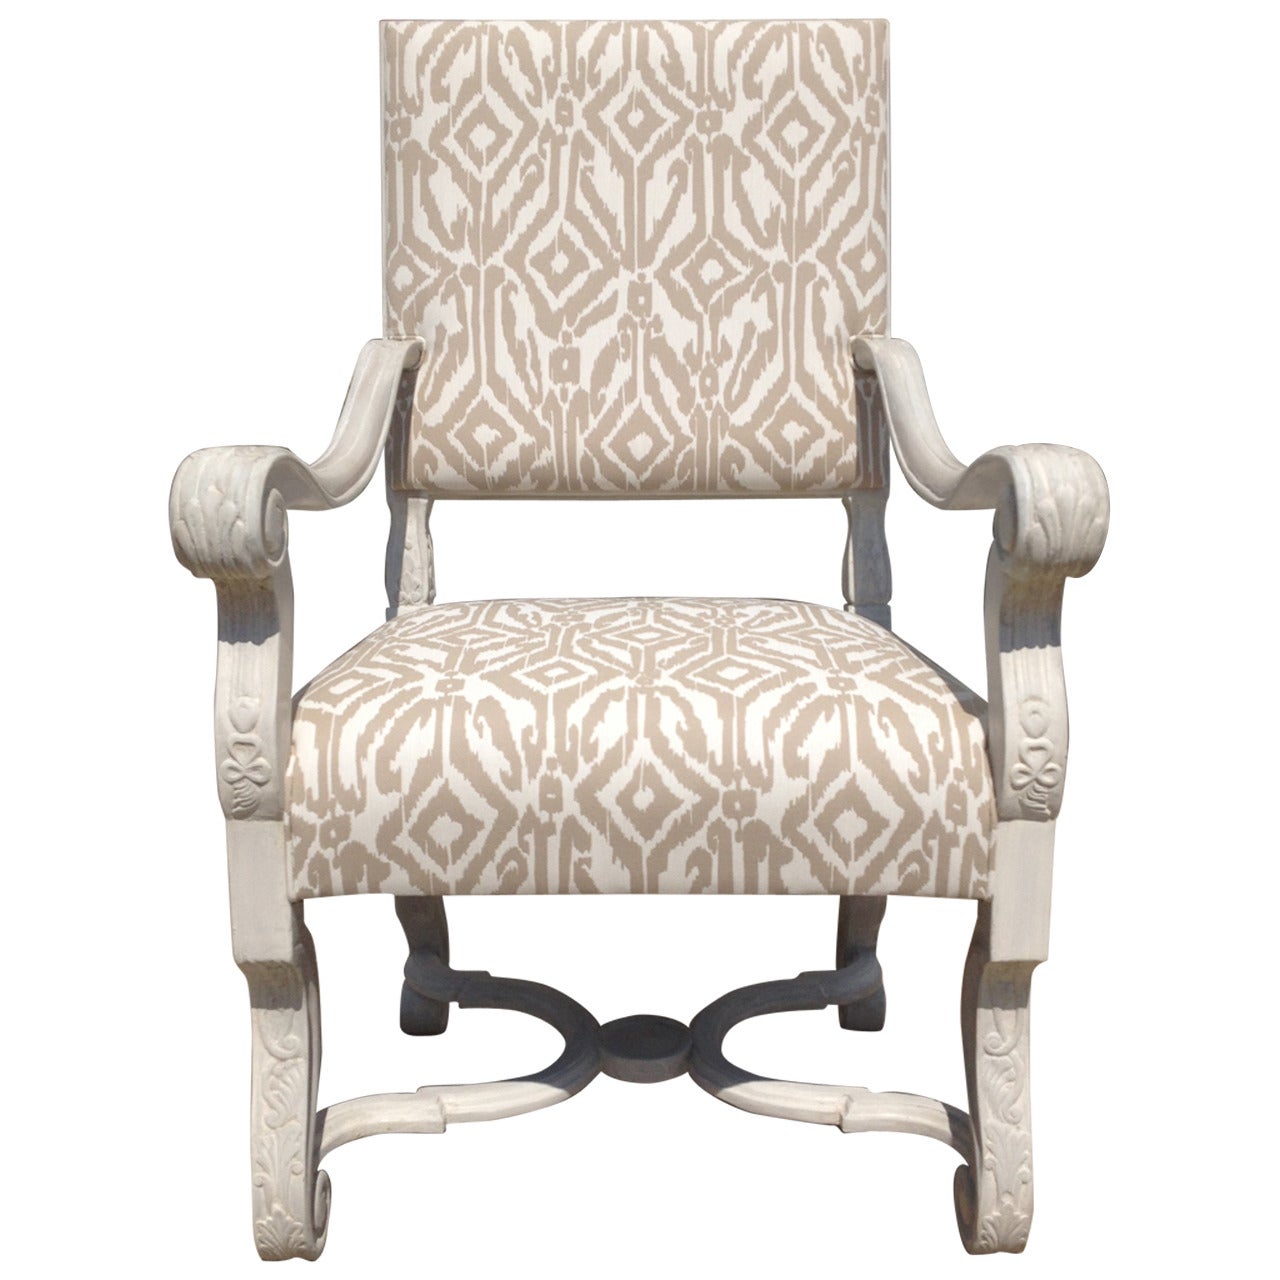 Pair Outdoor Chateau Chair, Made to Order For Sale